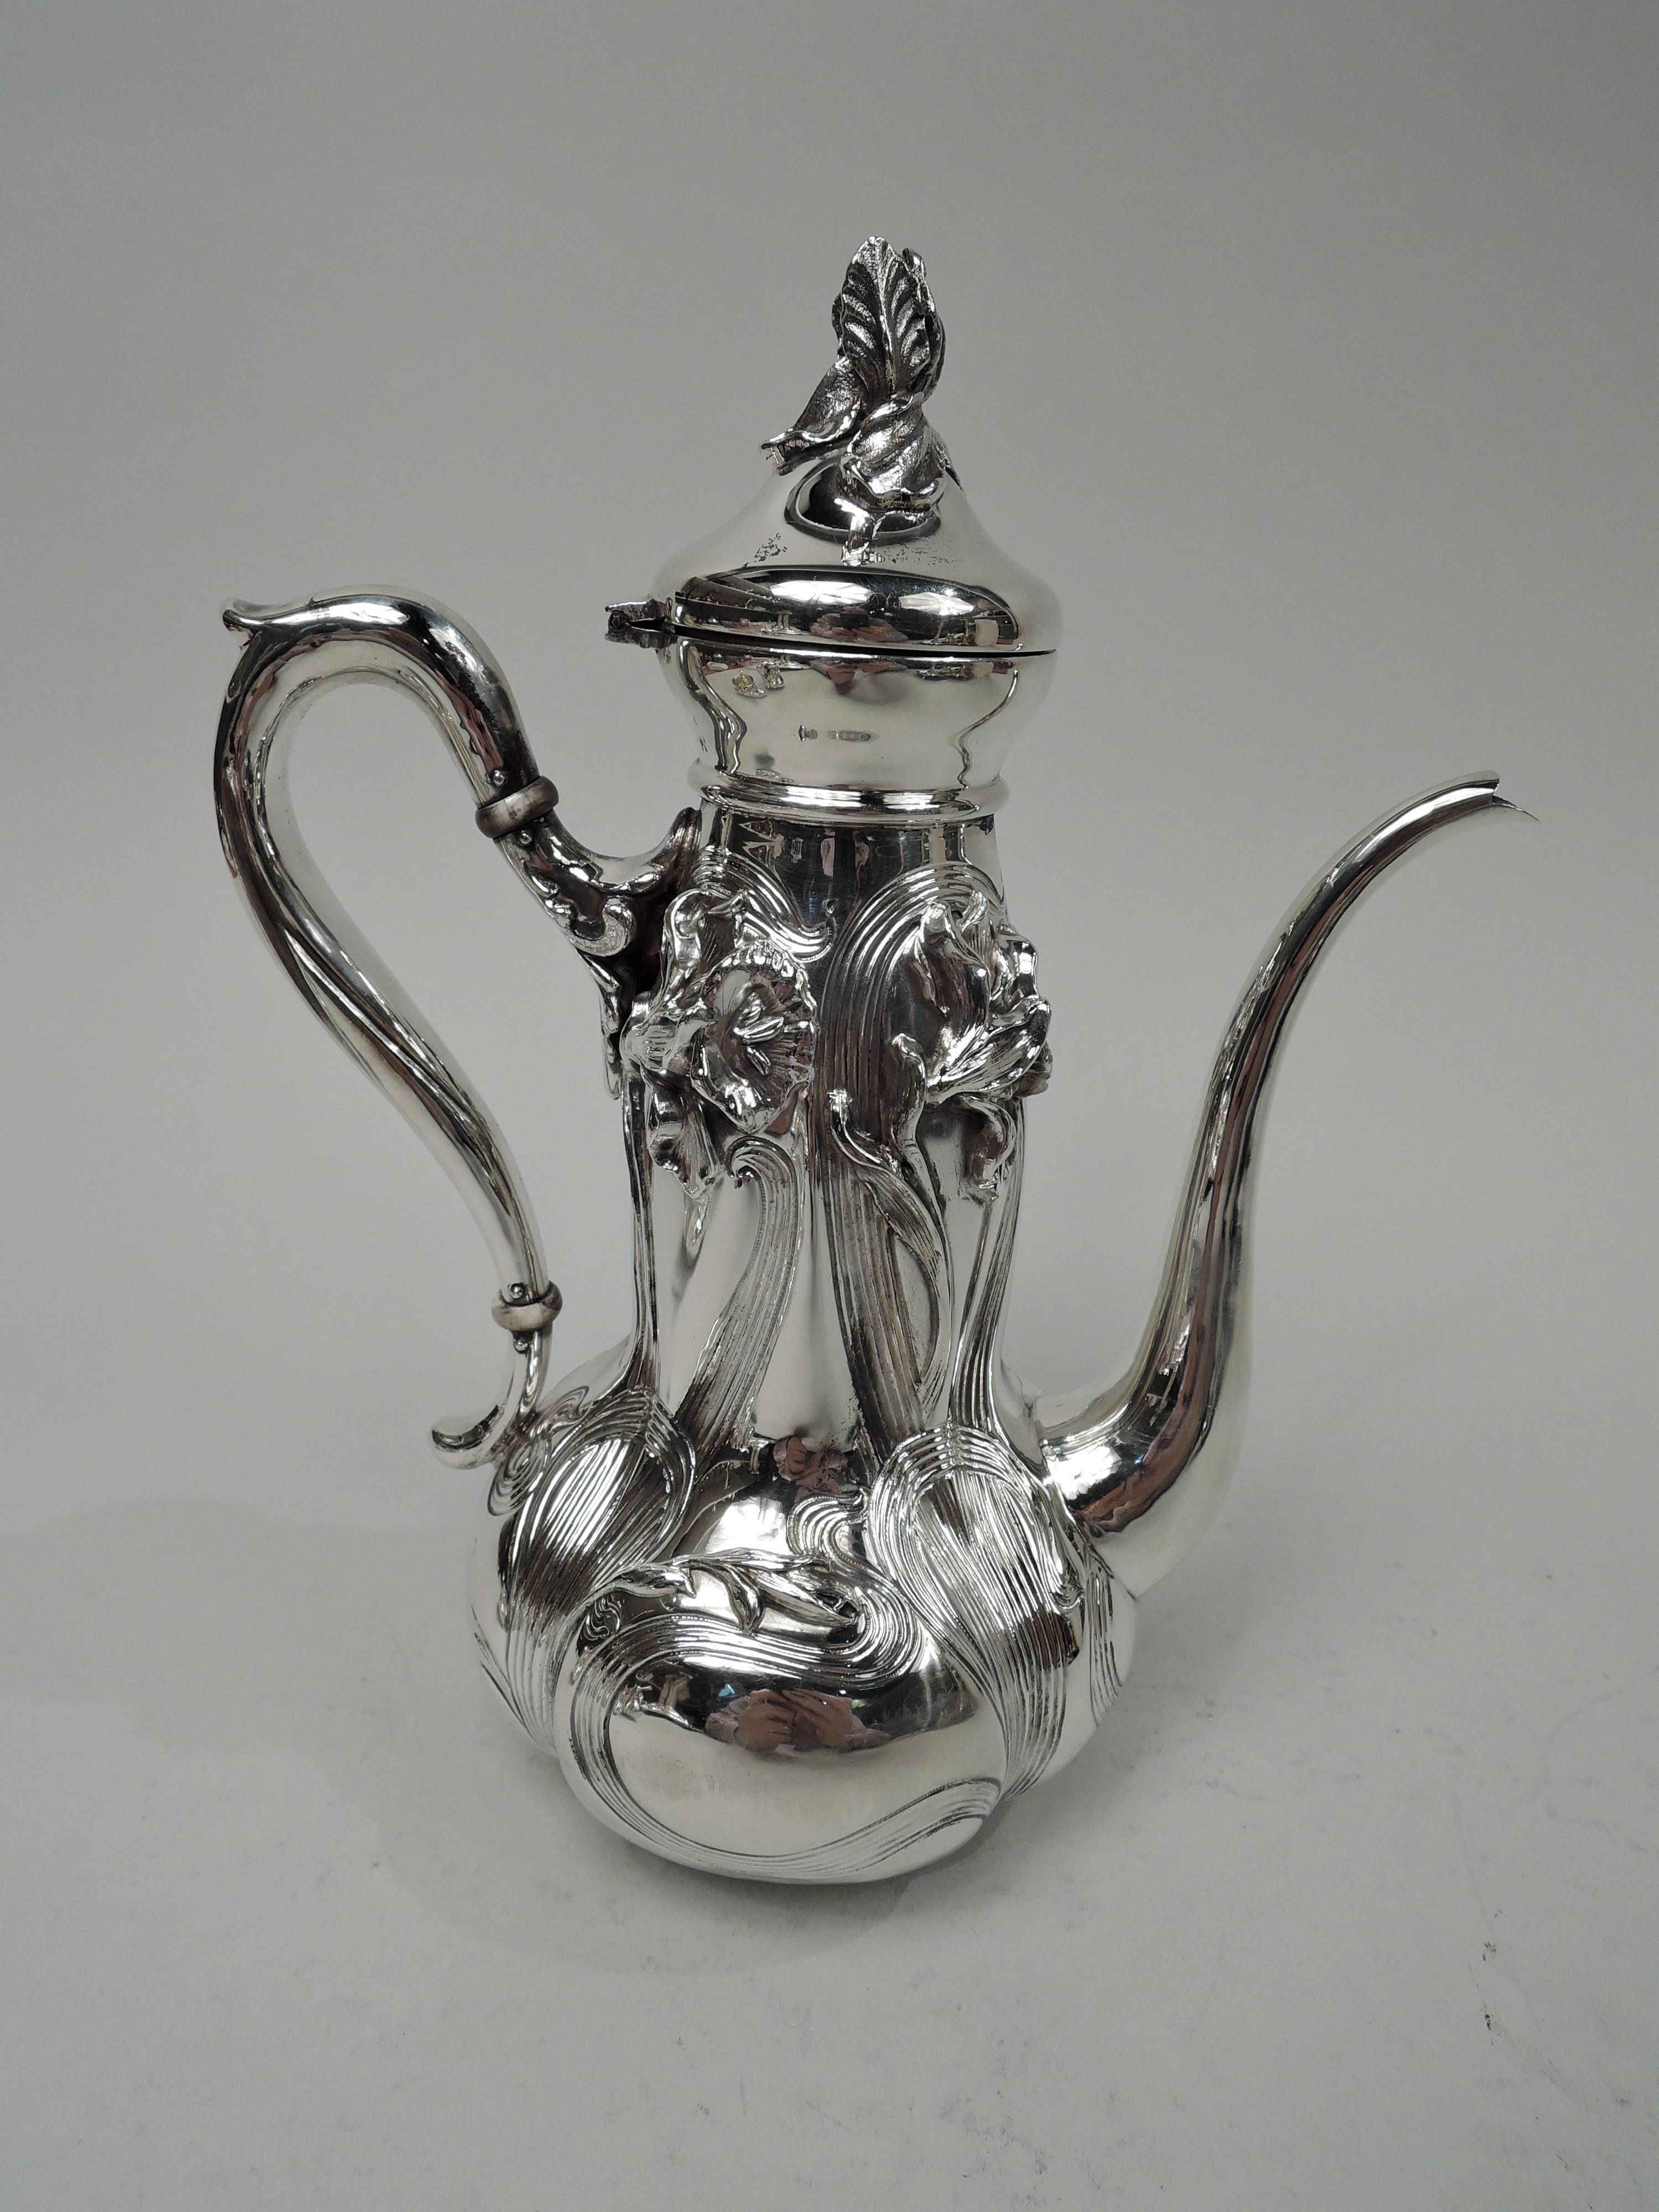 Art Nouveau sterling silver coffee set. Made by William B. Kerr & Co. in New York, ca 1890. This set comprises 3 pieces: Coffeepot, creamer, and sugar. Each: Lobed and globular body. Handles capped and high-looping. Coffeepot has hinged and domed